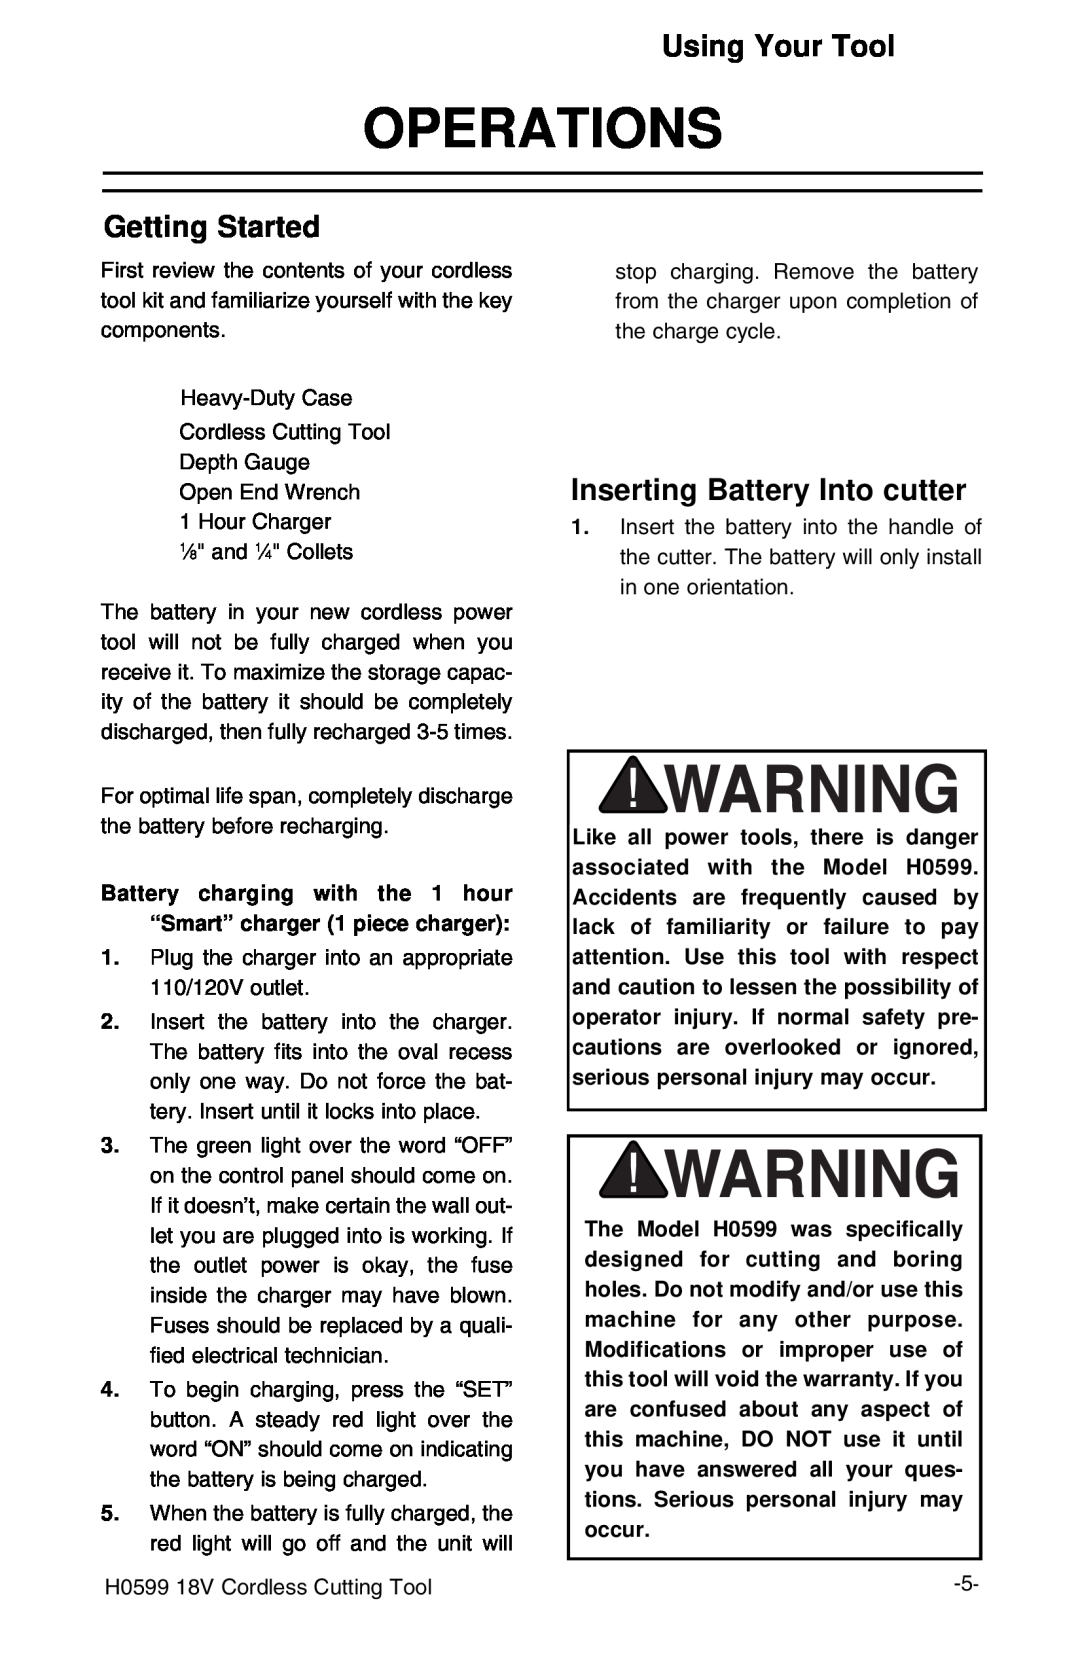 Grizzly H0599 instruction manual Operations, Using Your Tool, Getting Started, Inserting Battery Into cutter 